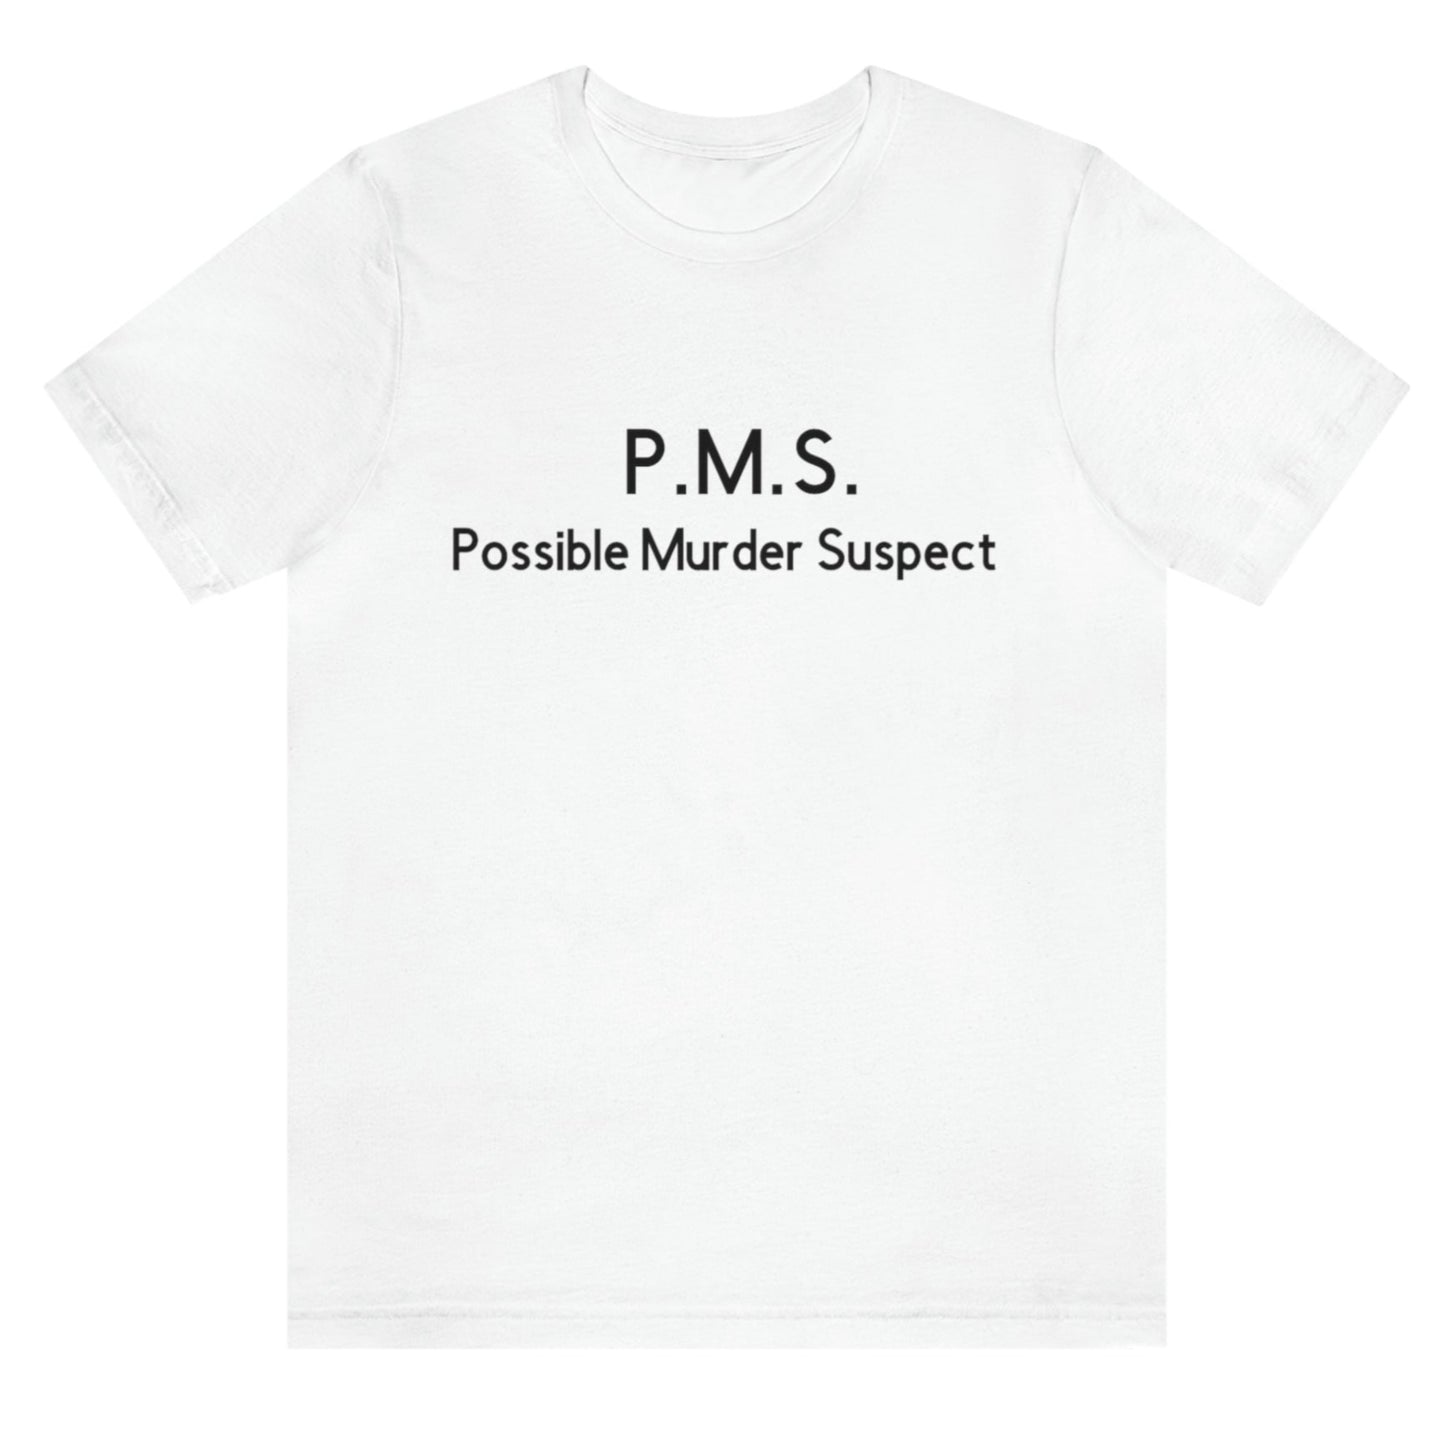 pms-possible-murder-suspect-white t-shirt